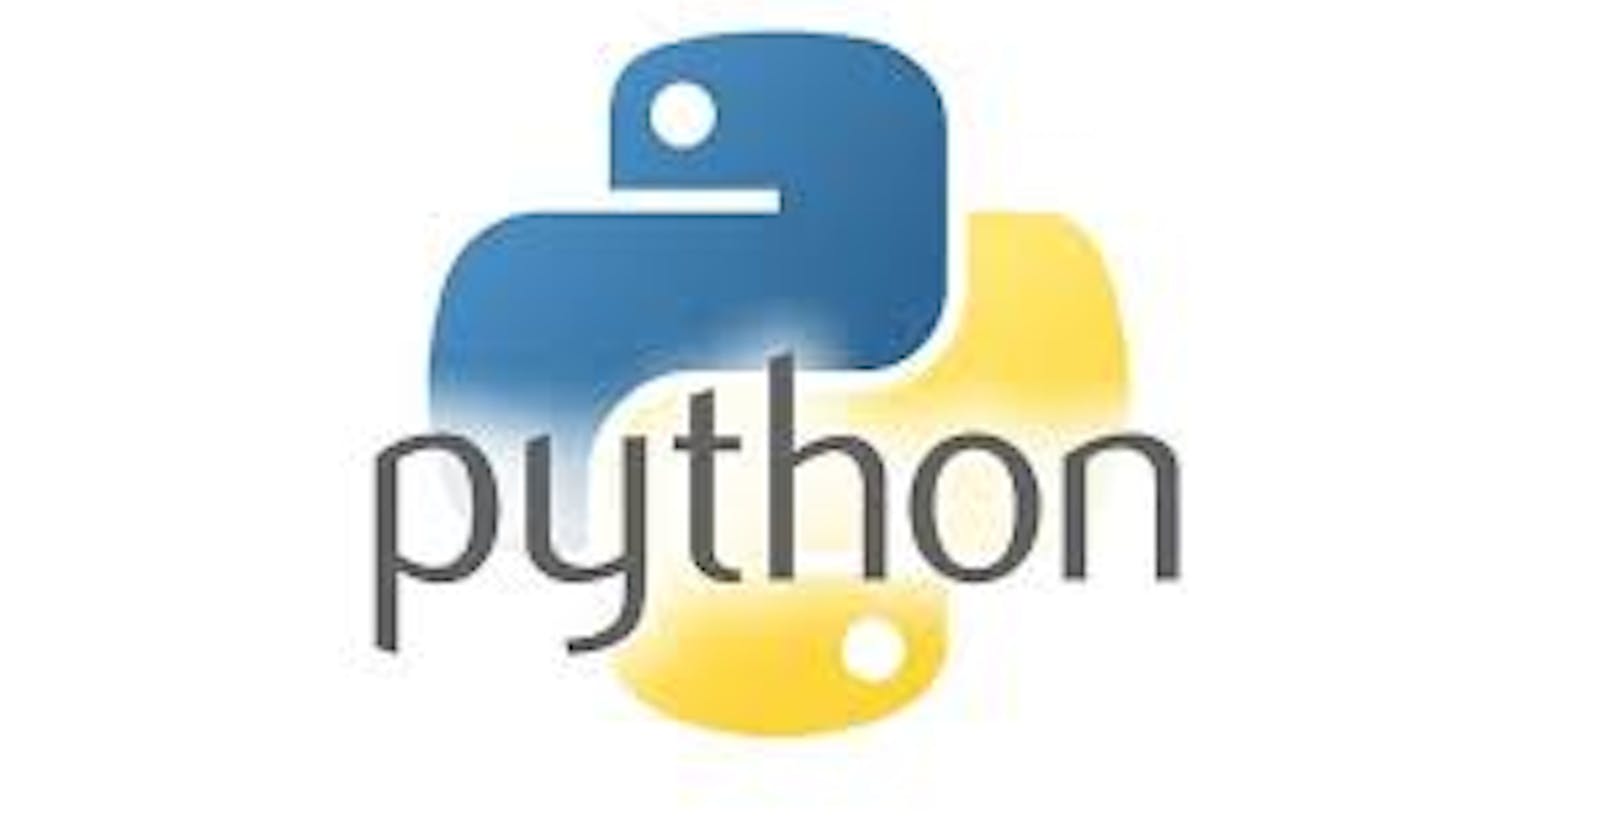 INSTALLING LIBRARIES IN PYTHON